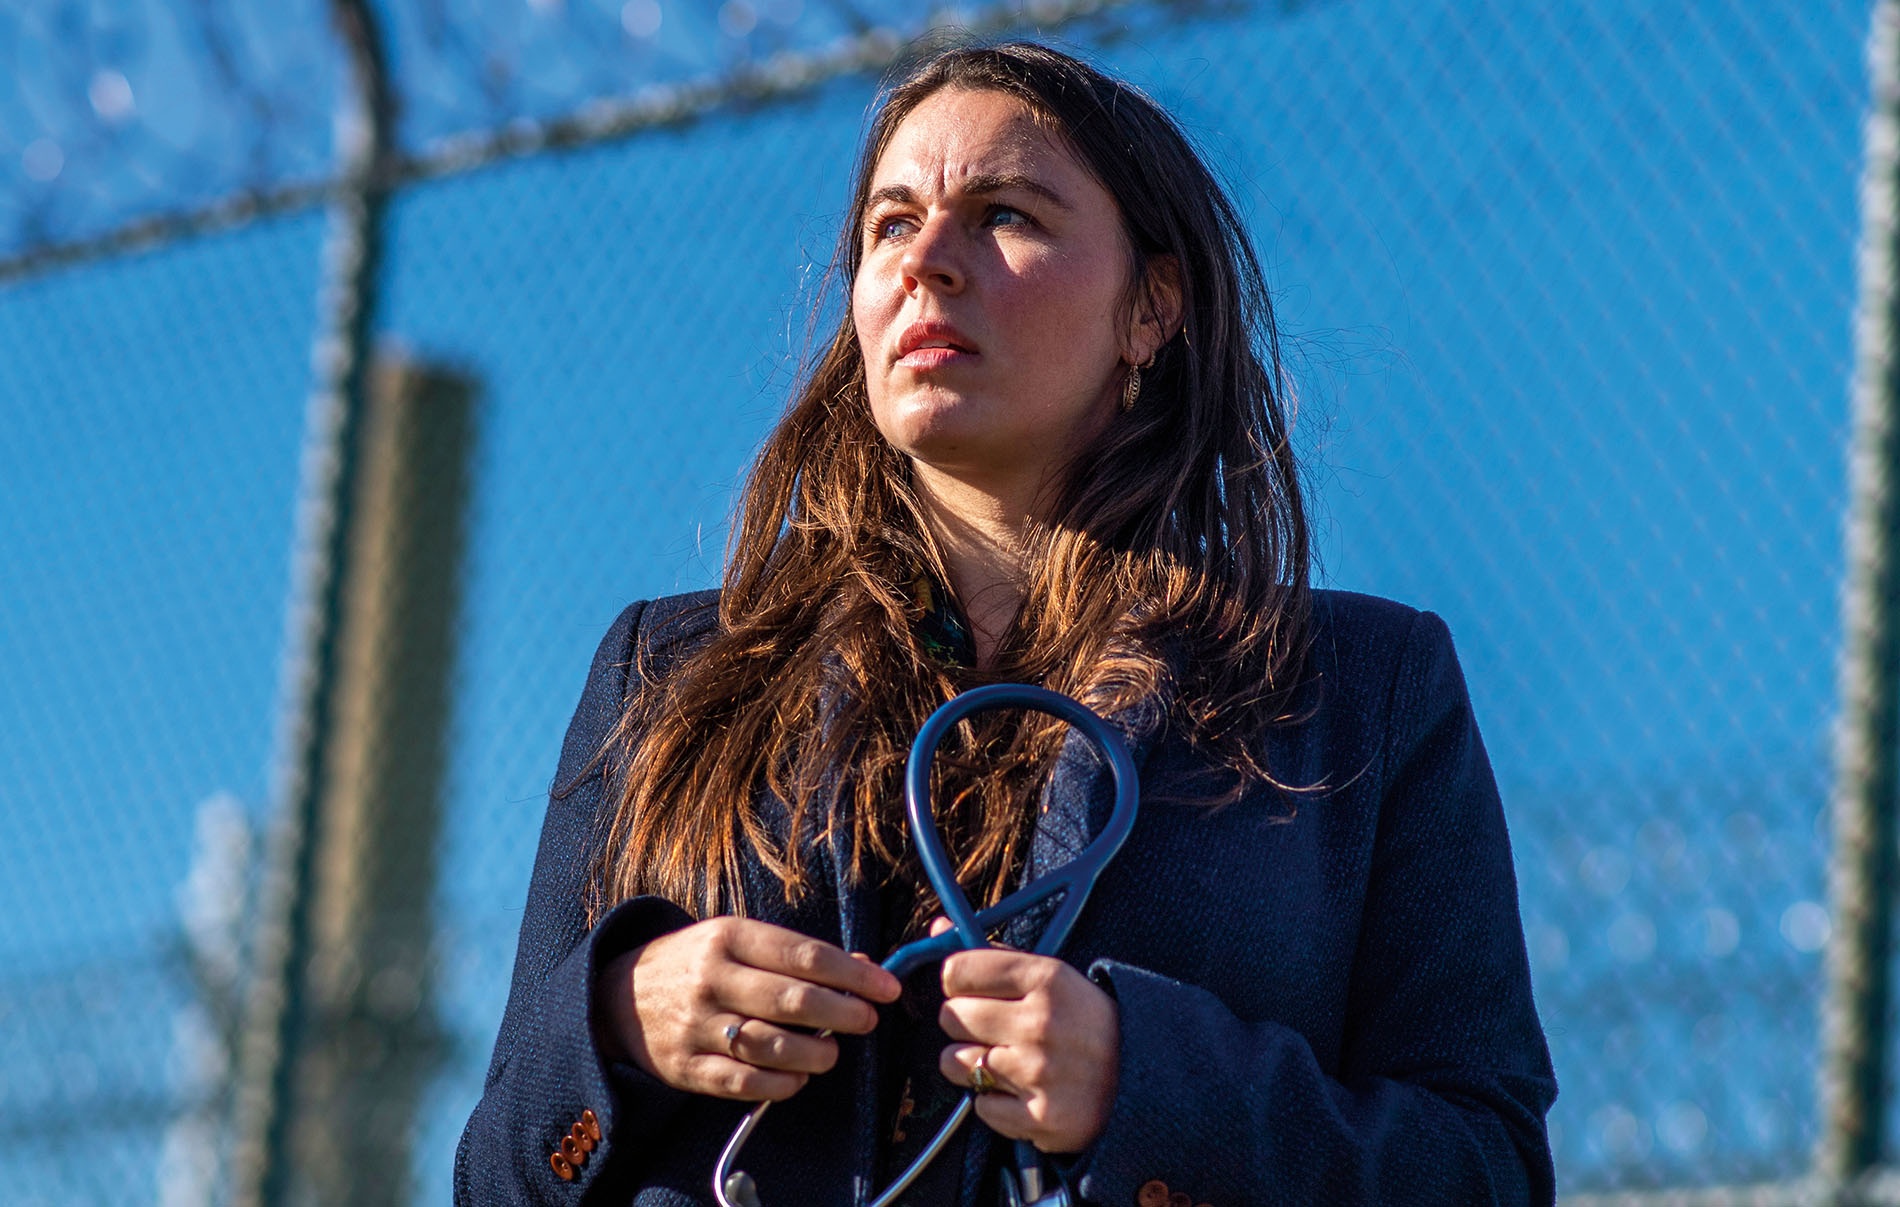 An image of Rachel Bedard holding a stethoscope outside of a prison